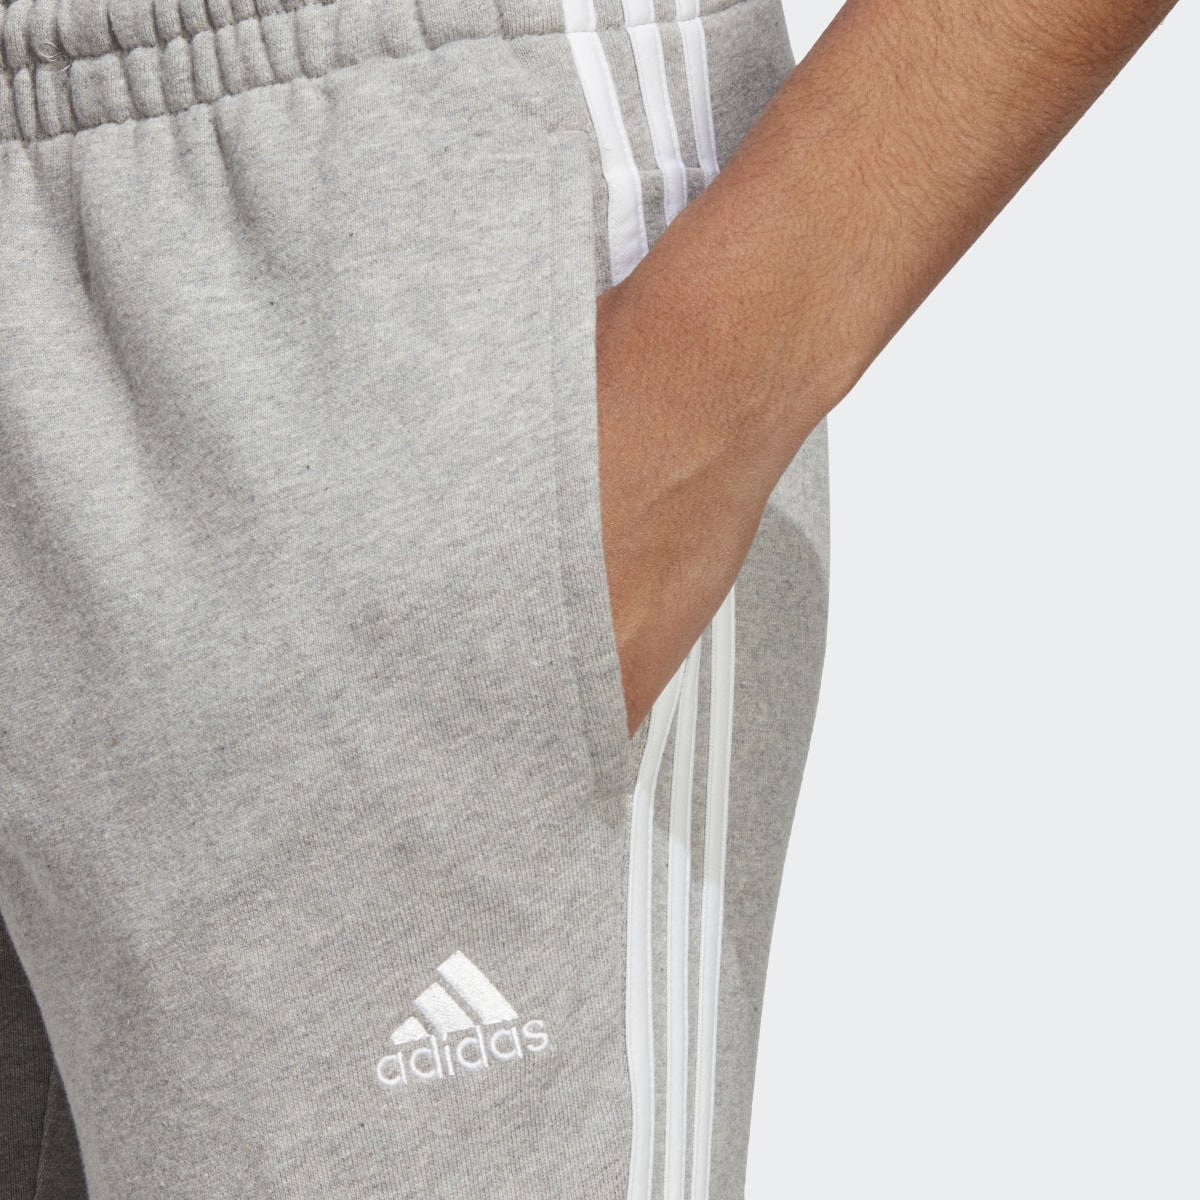 Adidas Essentials 3-Stripes French Terry Cuffed Joggers. 5